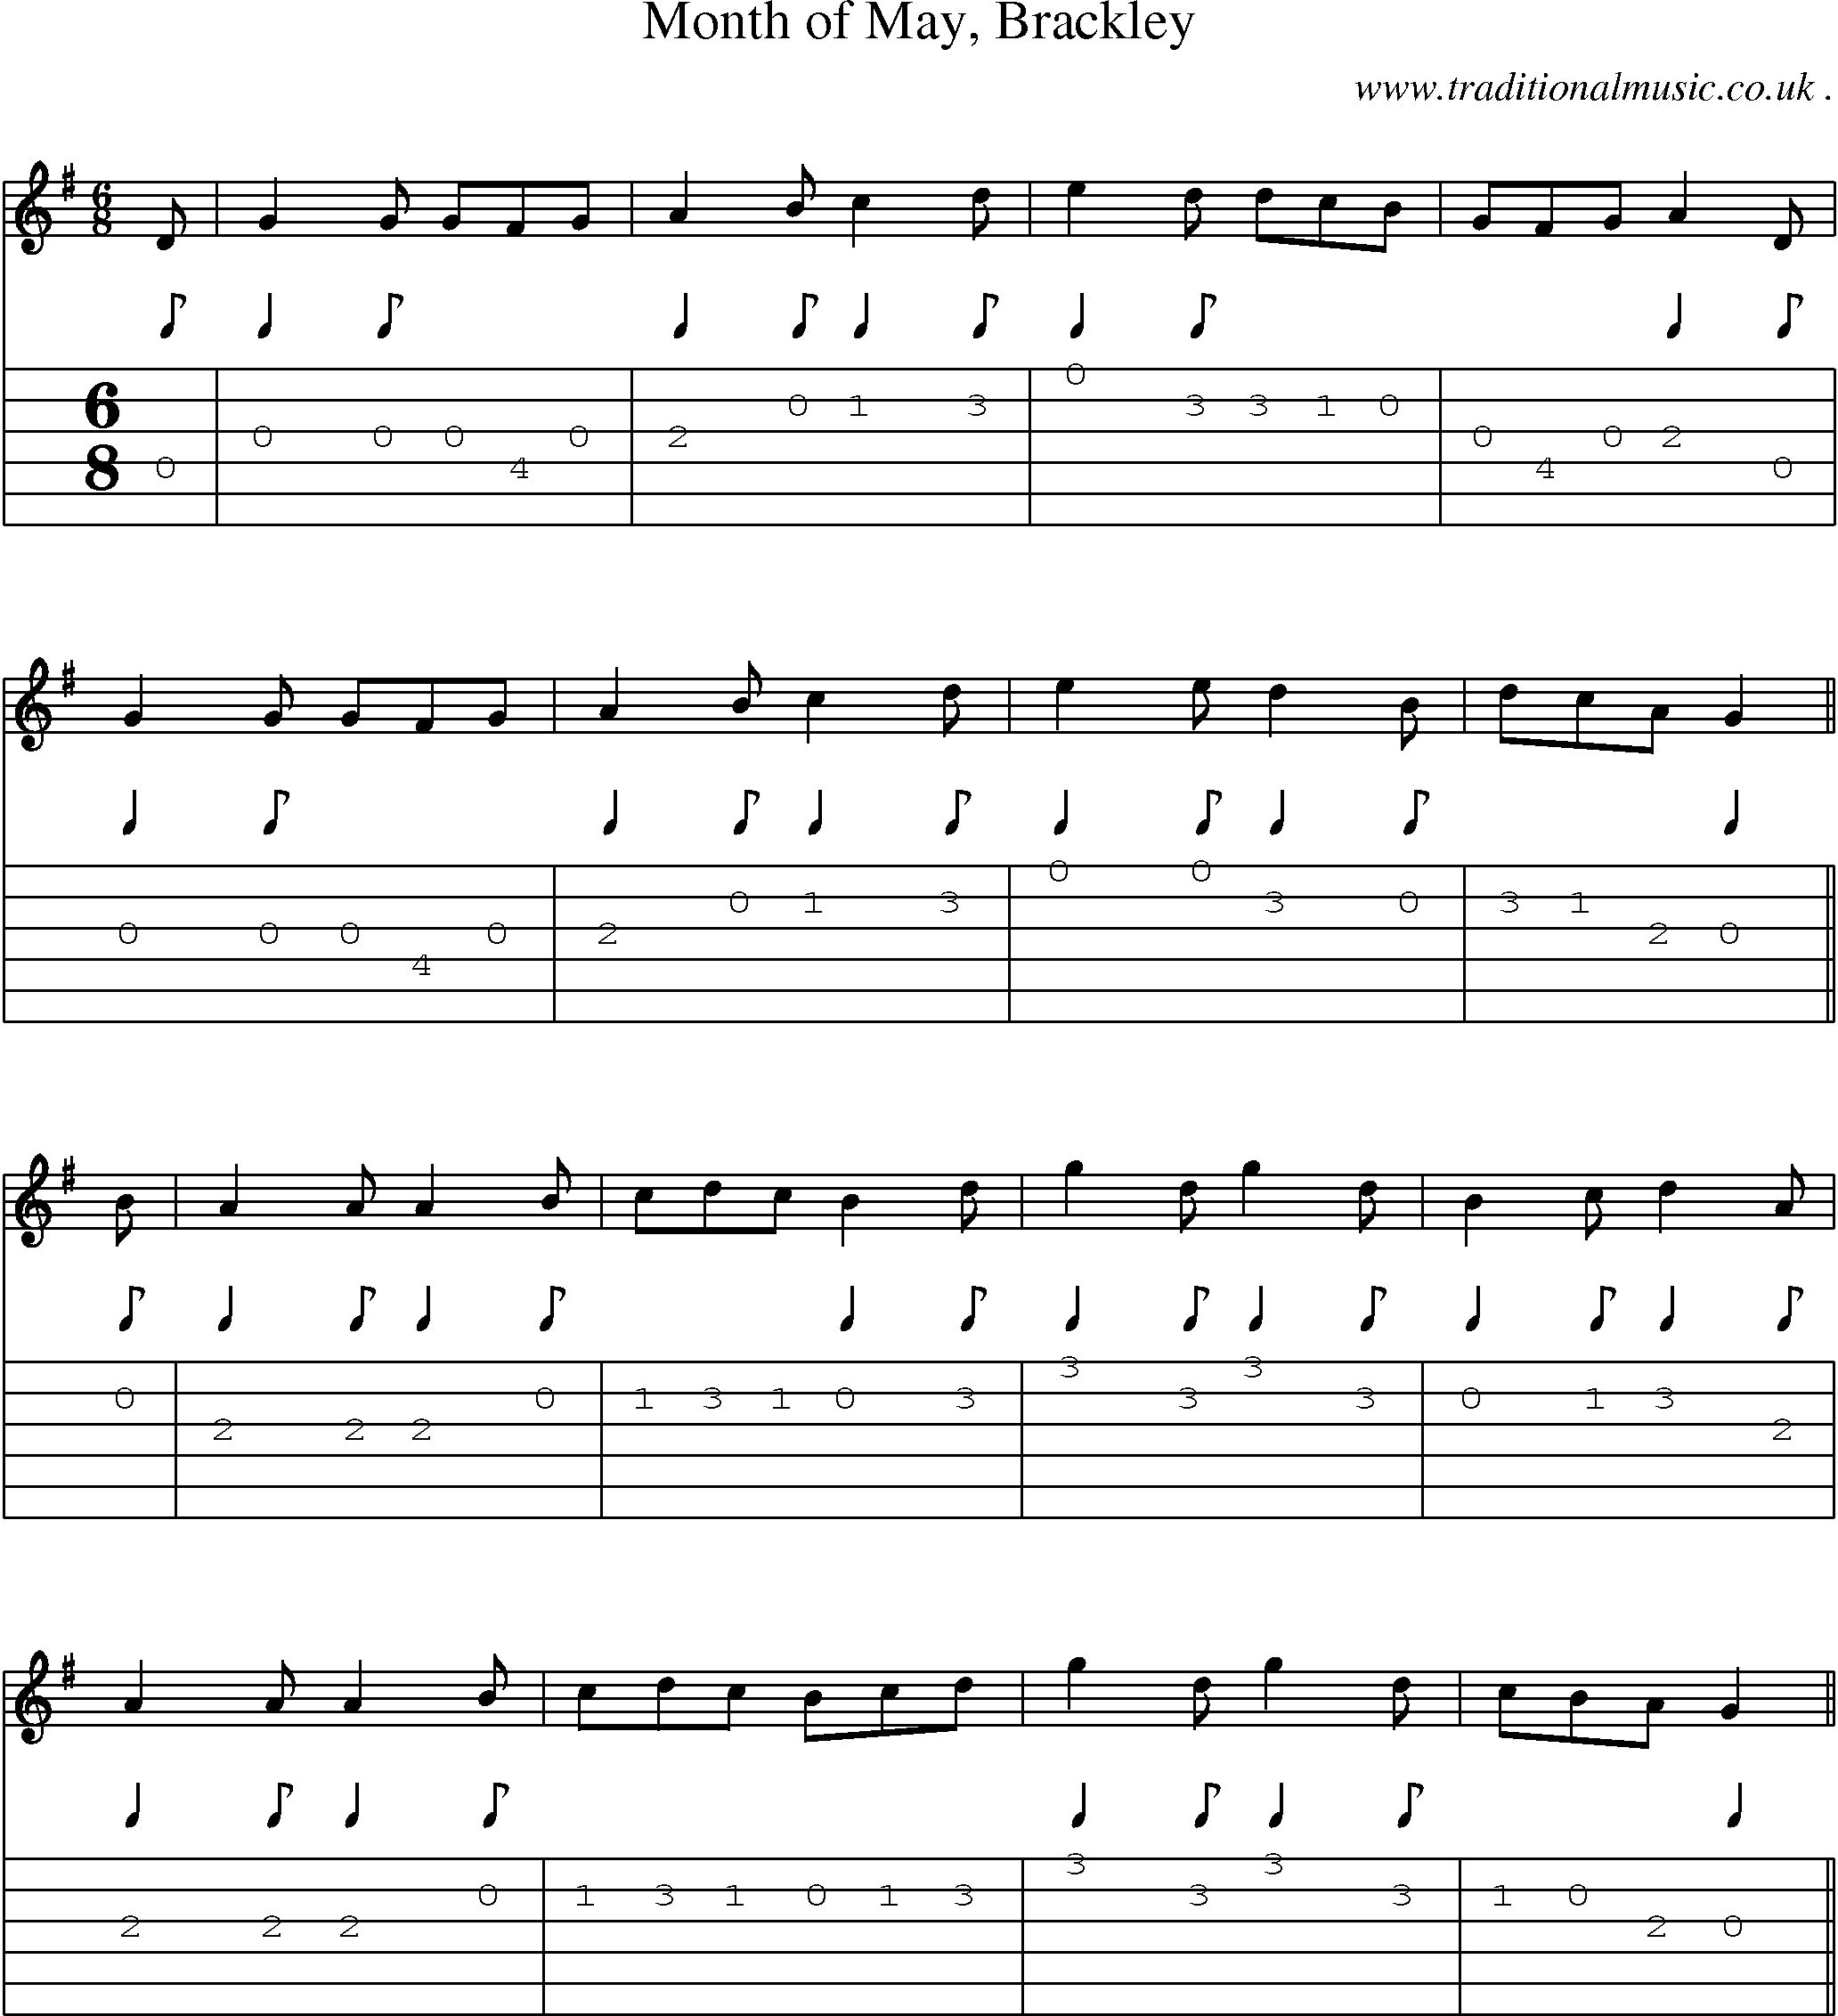 Sheet-Music and Guitar Tabs for Month Of May Brackley